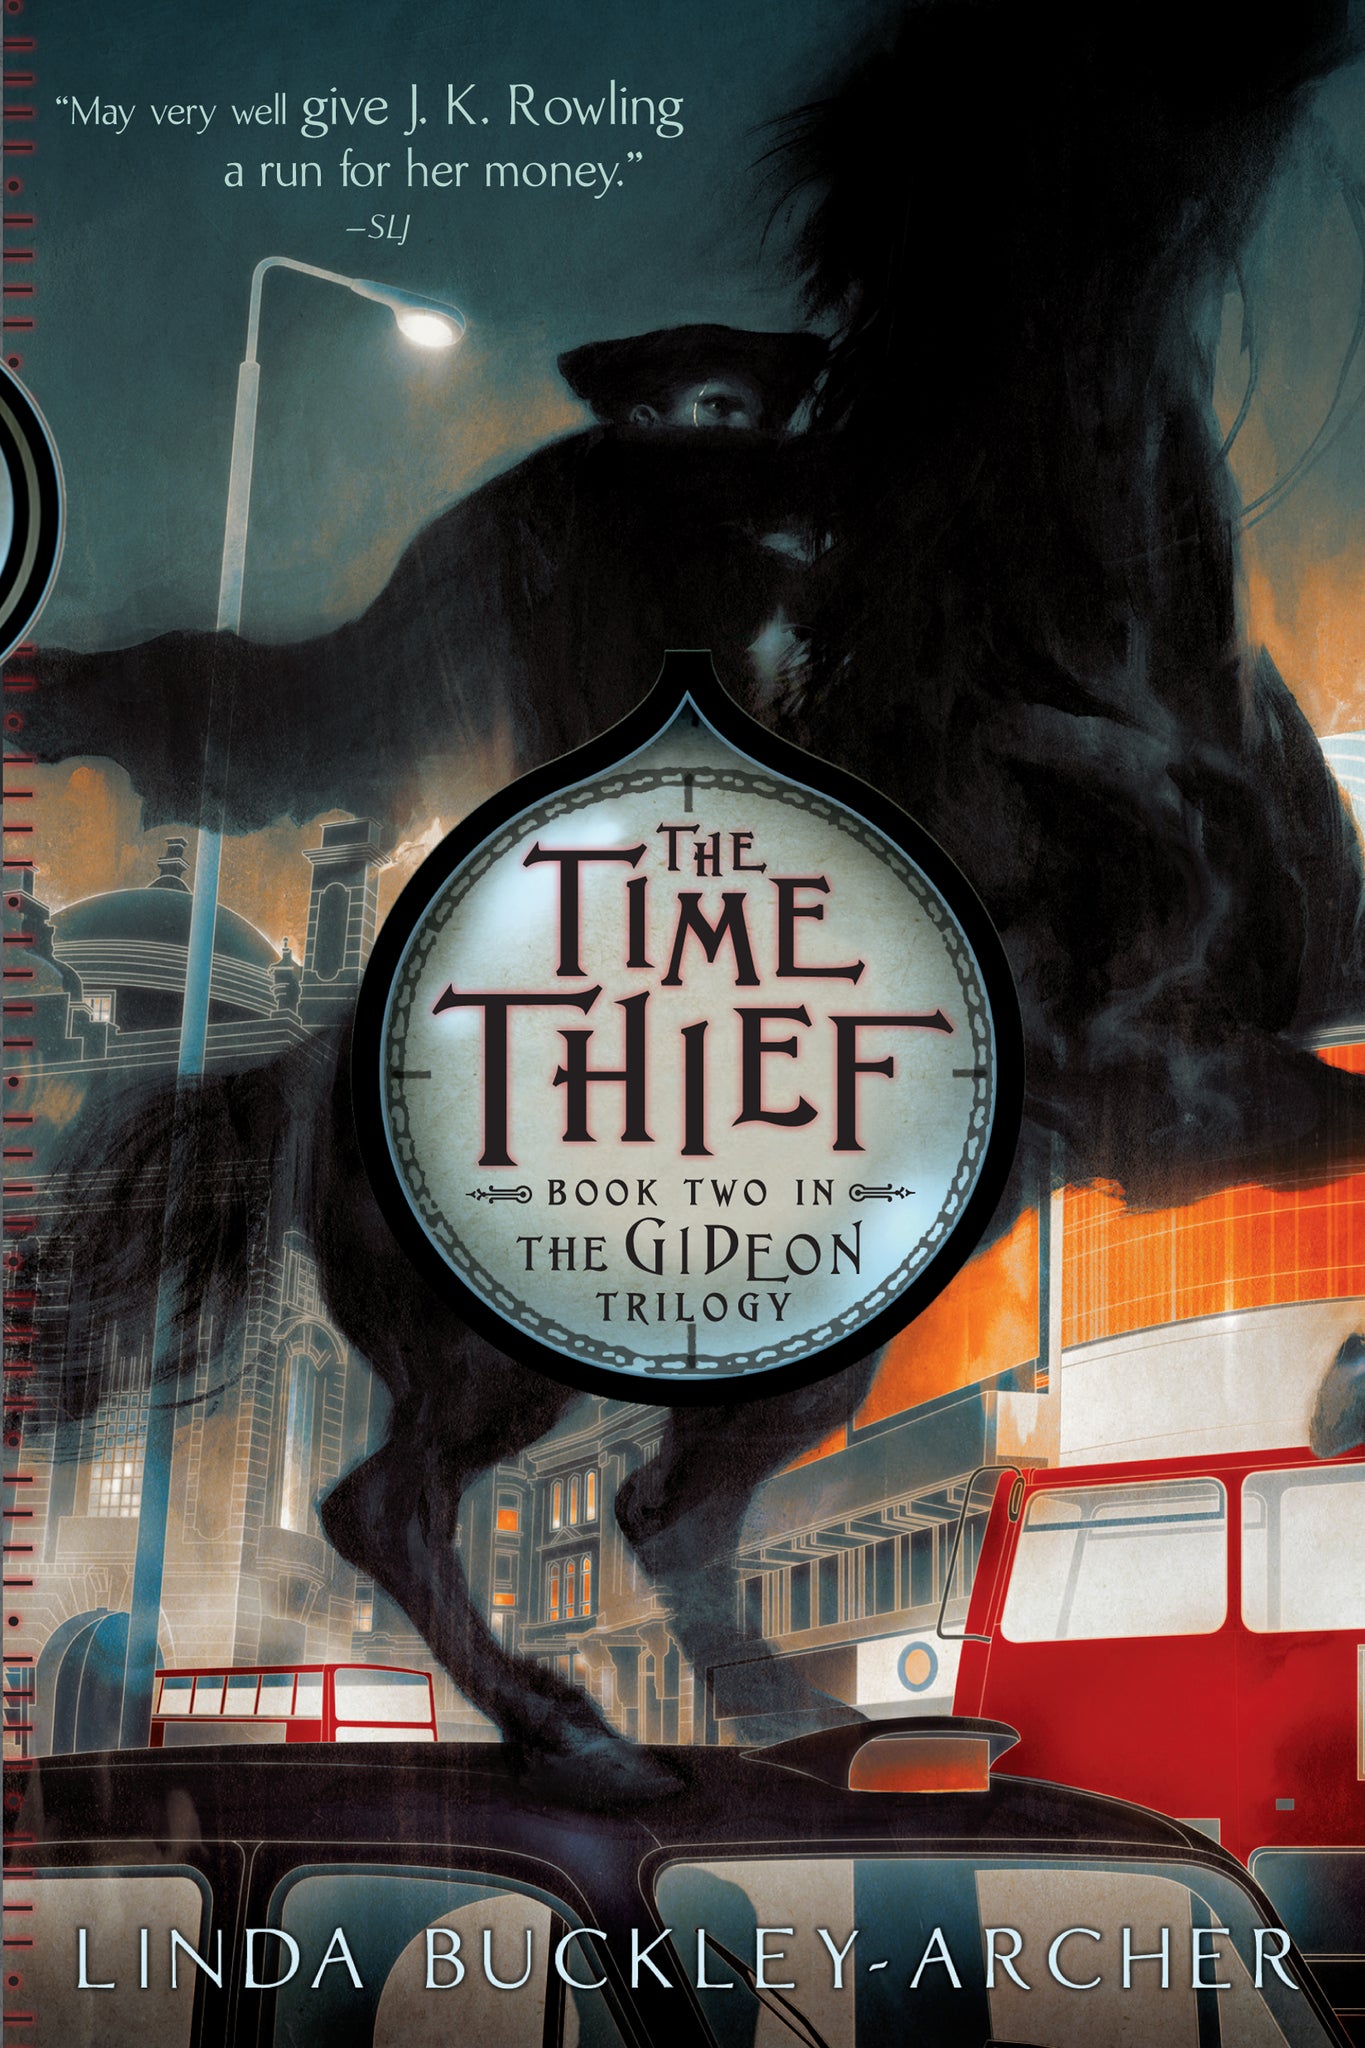 The Time Thief (Book #2) - Linda Buckley-Archer